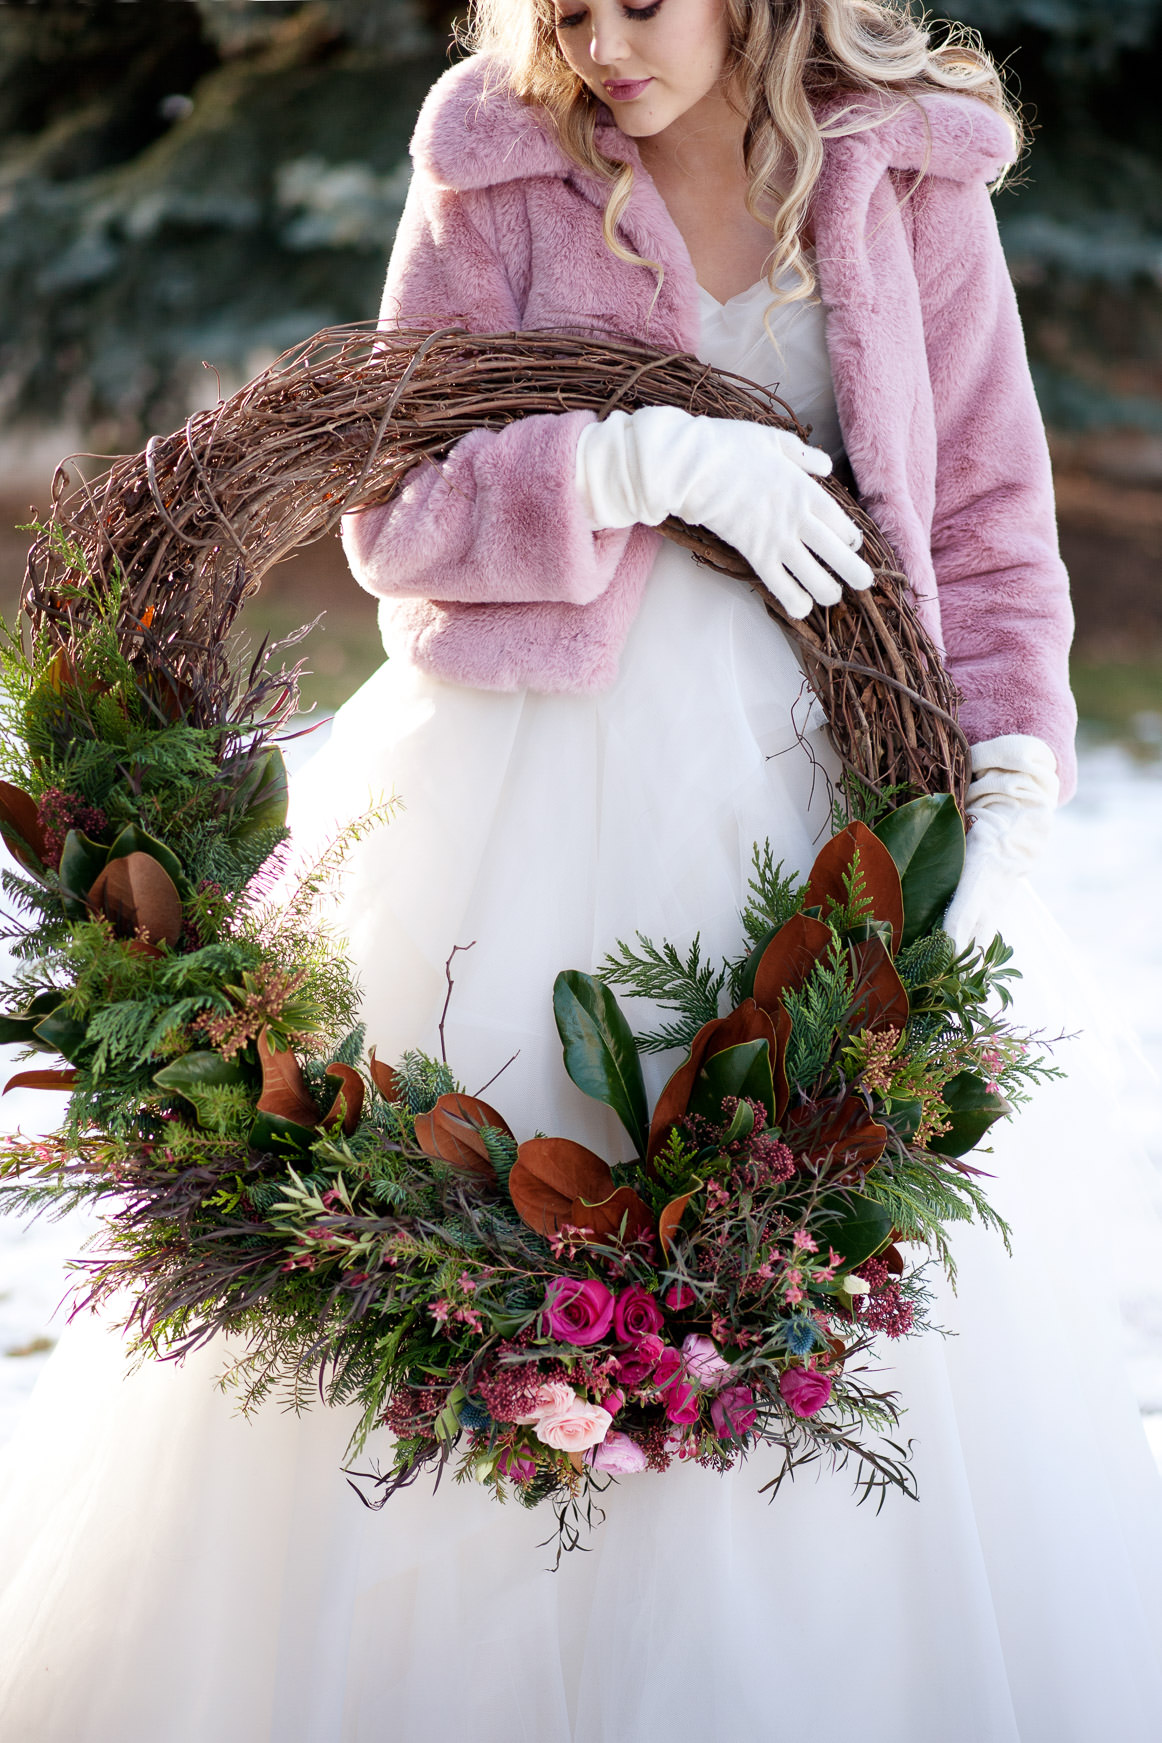 winter bride holding a wreath captured by one of the best wedding photographers in Calgary Tara Whittaker